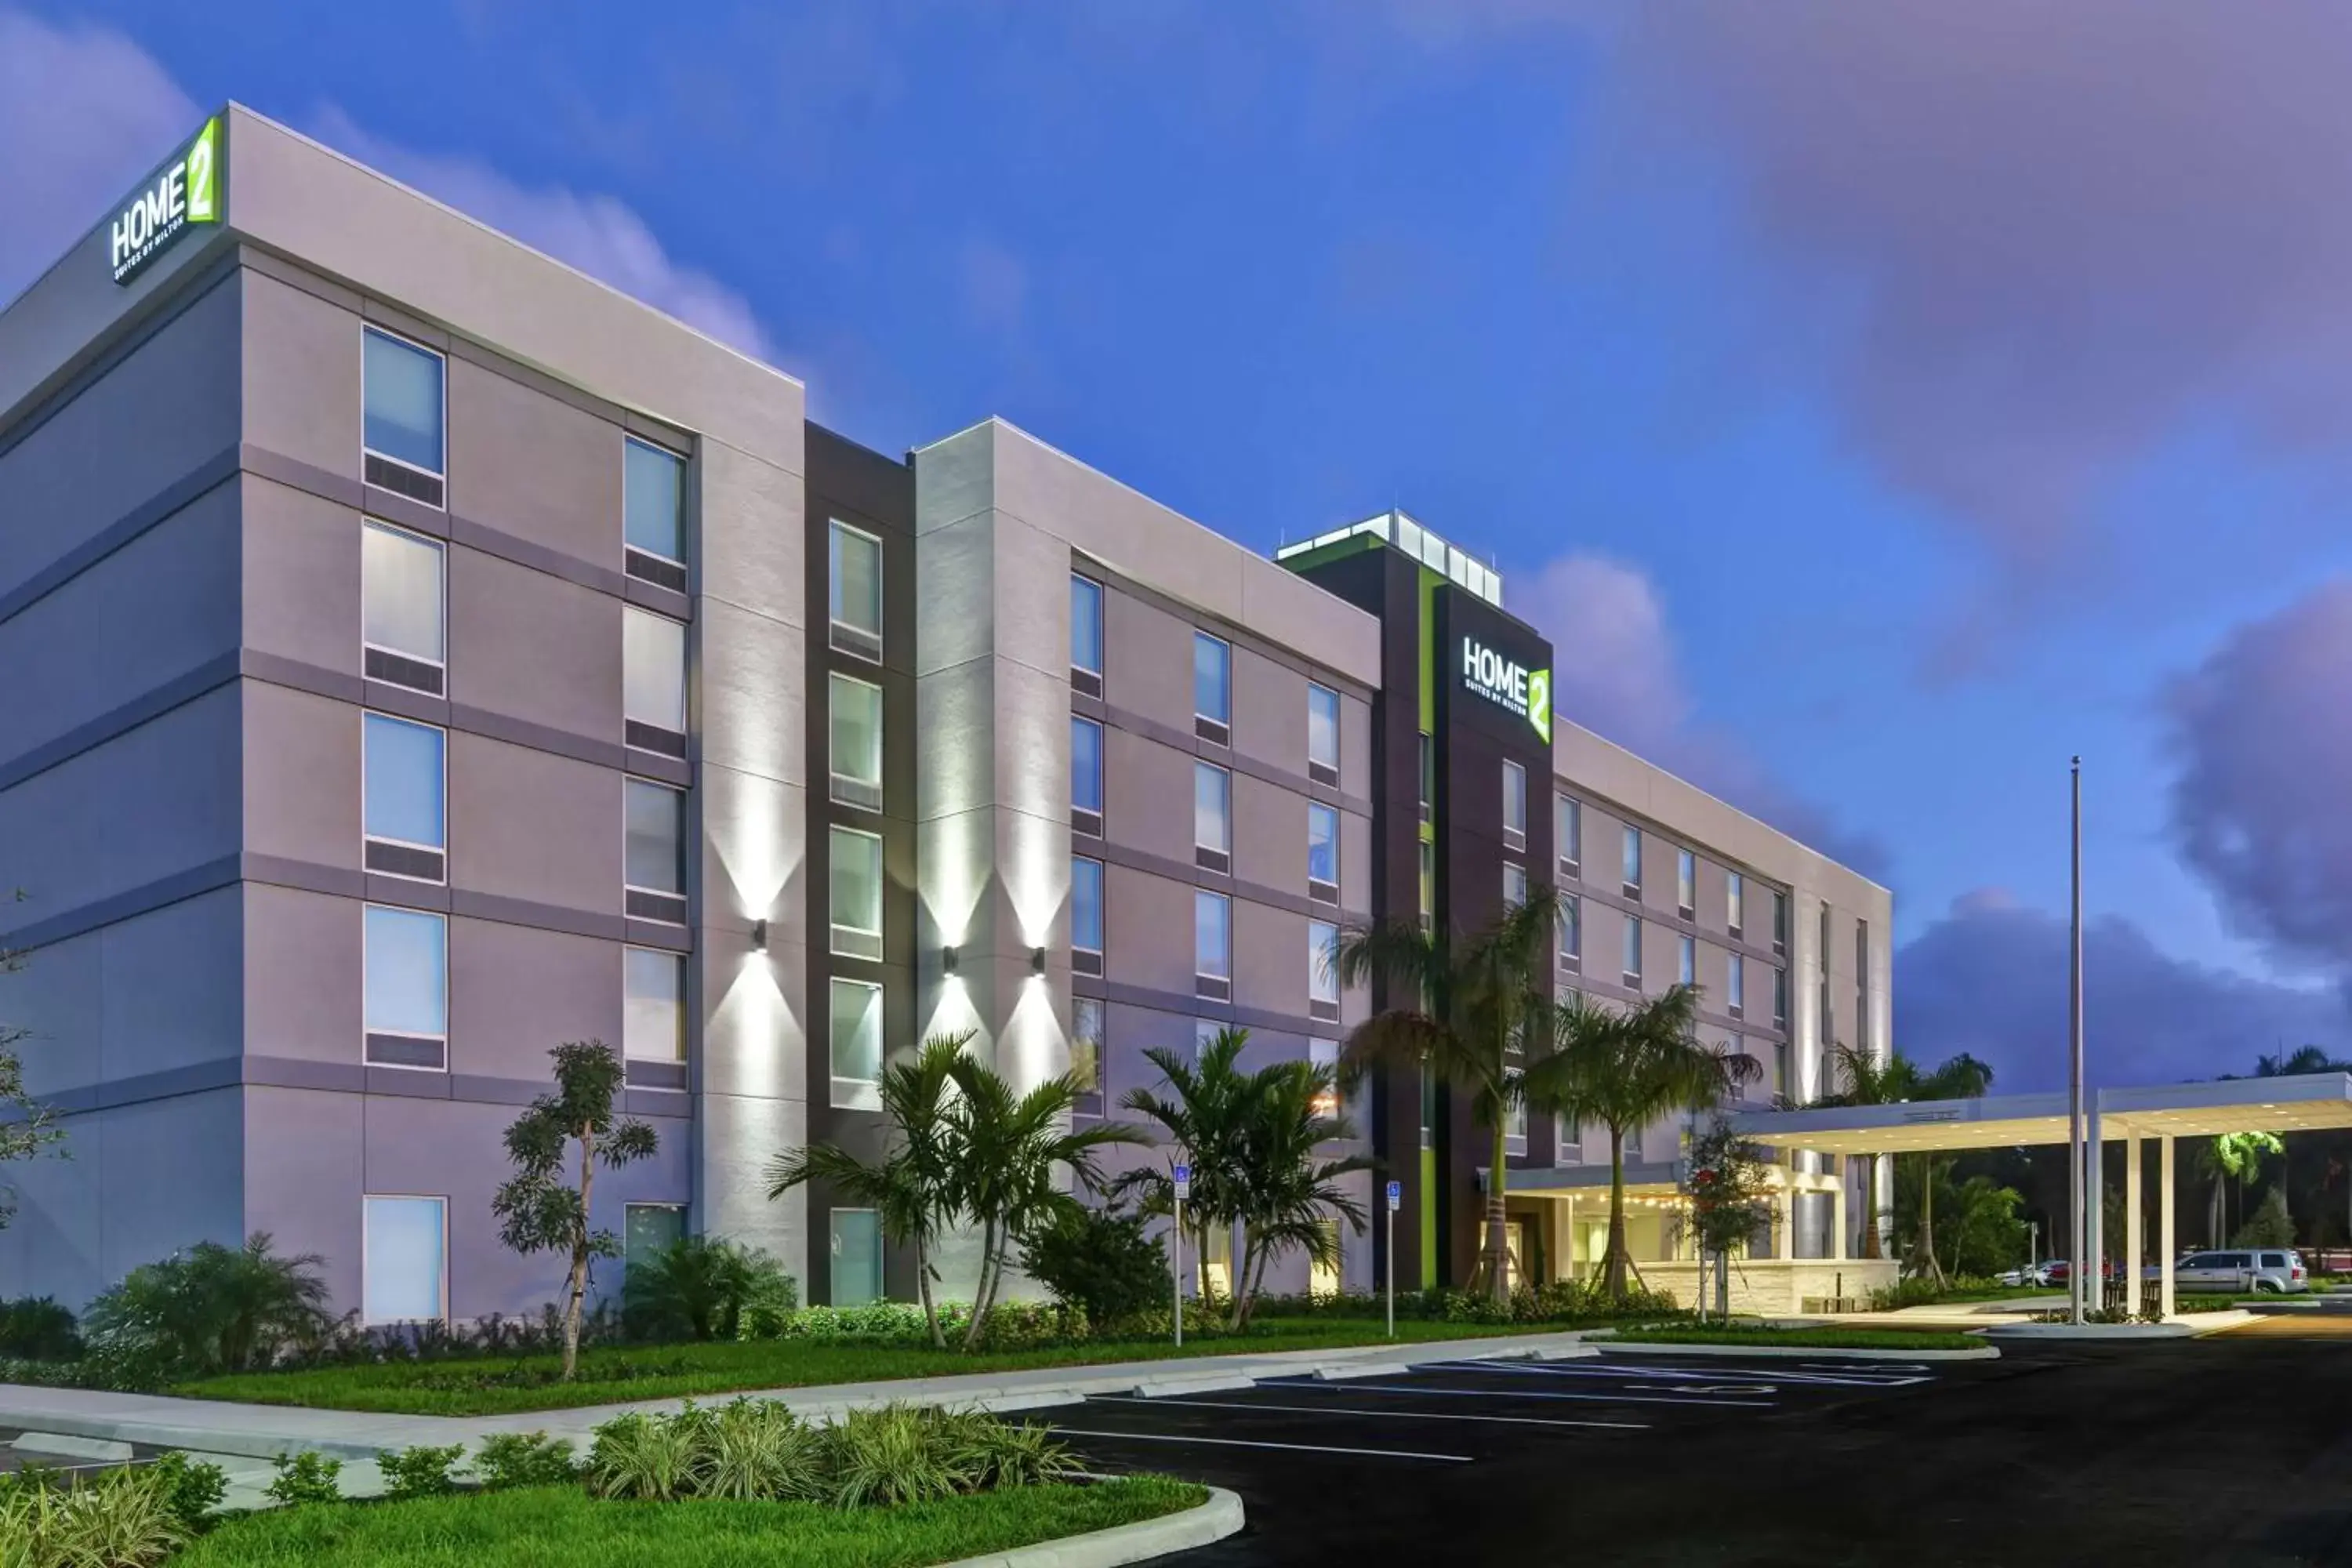 Property Building in Home2 Suites By Hilton West Palm Beach Airport